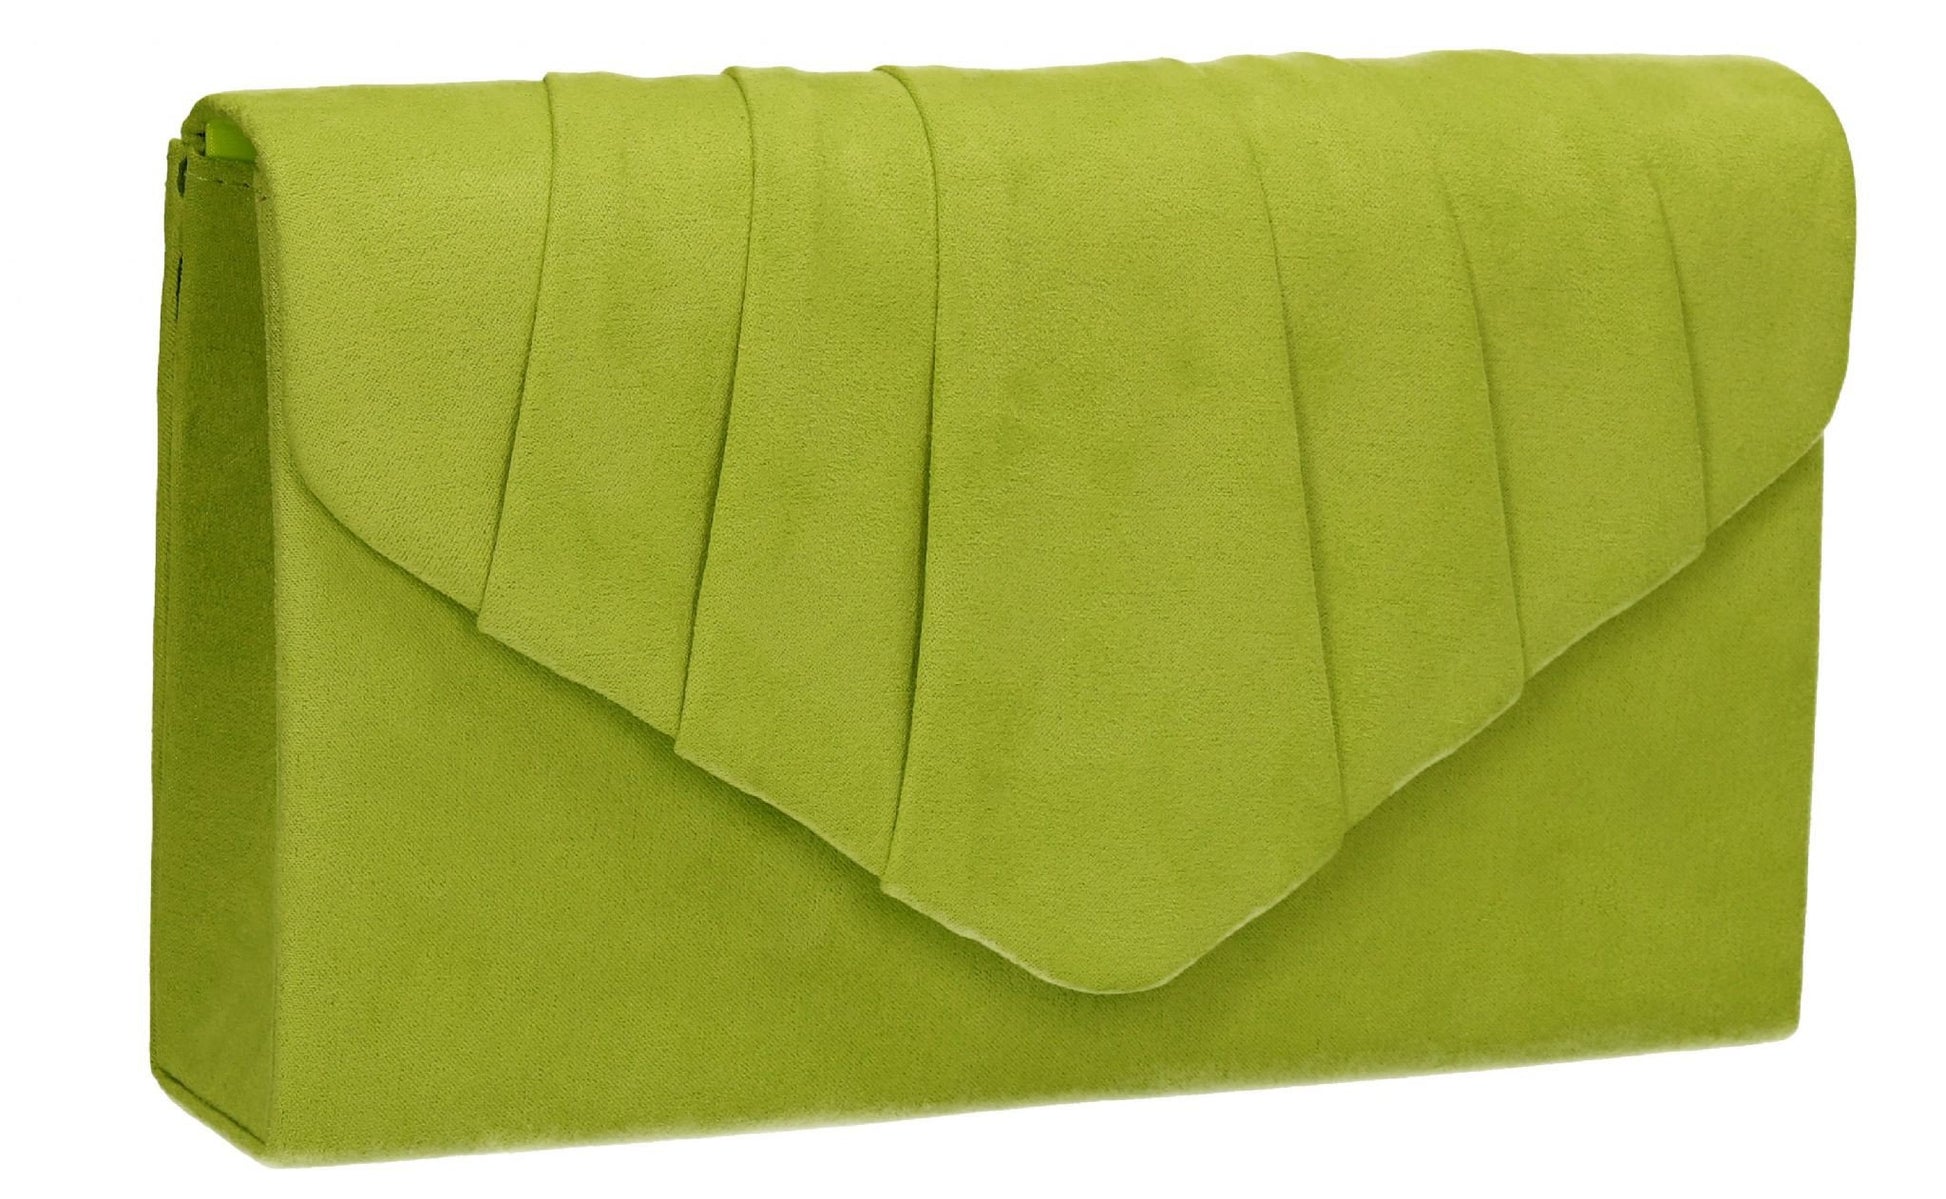 SWANKYSWANS Iggy Faux Suede Clutch Bag Lime Green Cute Cheap Clutch Bag For Weddings School and Work